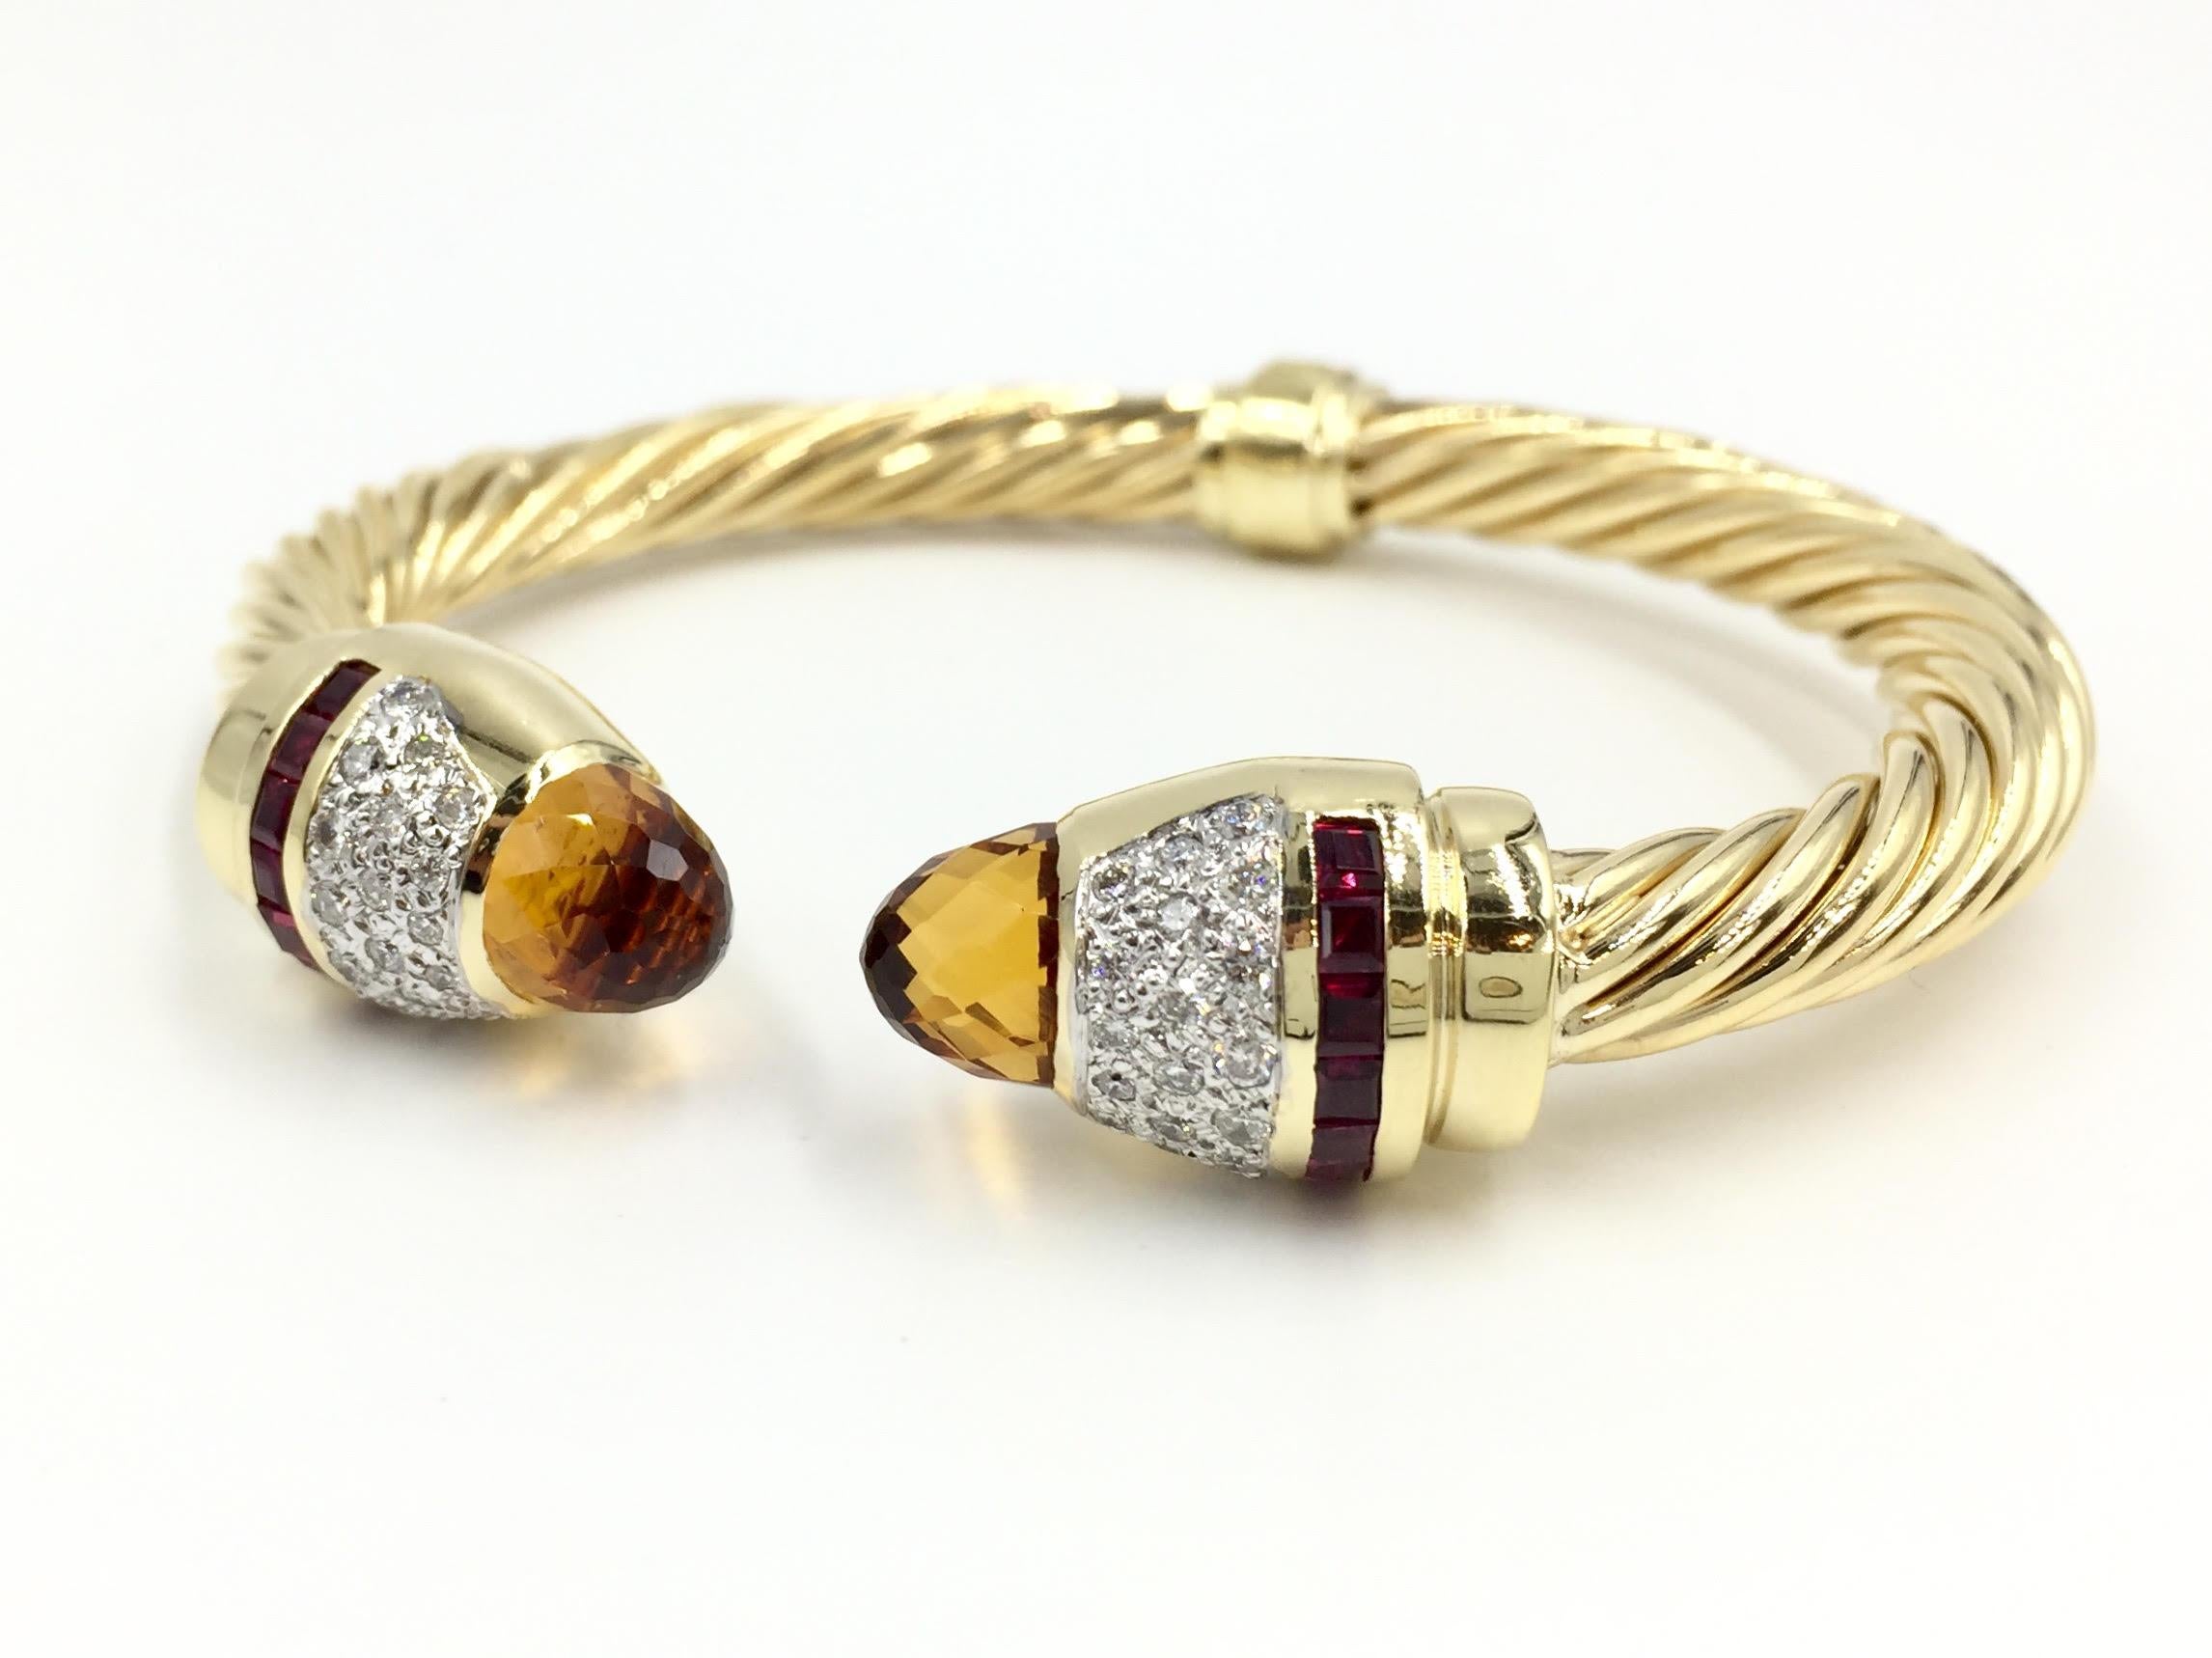 Polished 14 karat yellow gold cable style cuff bracelet featuring two beautifully faceted Citrines at each end, 0.80 carats of pavé set diamonds and channel set princess cut Rubellites. Diamonds are approximately G-H color, SI1 clarity
Bracelet has